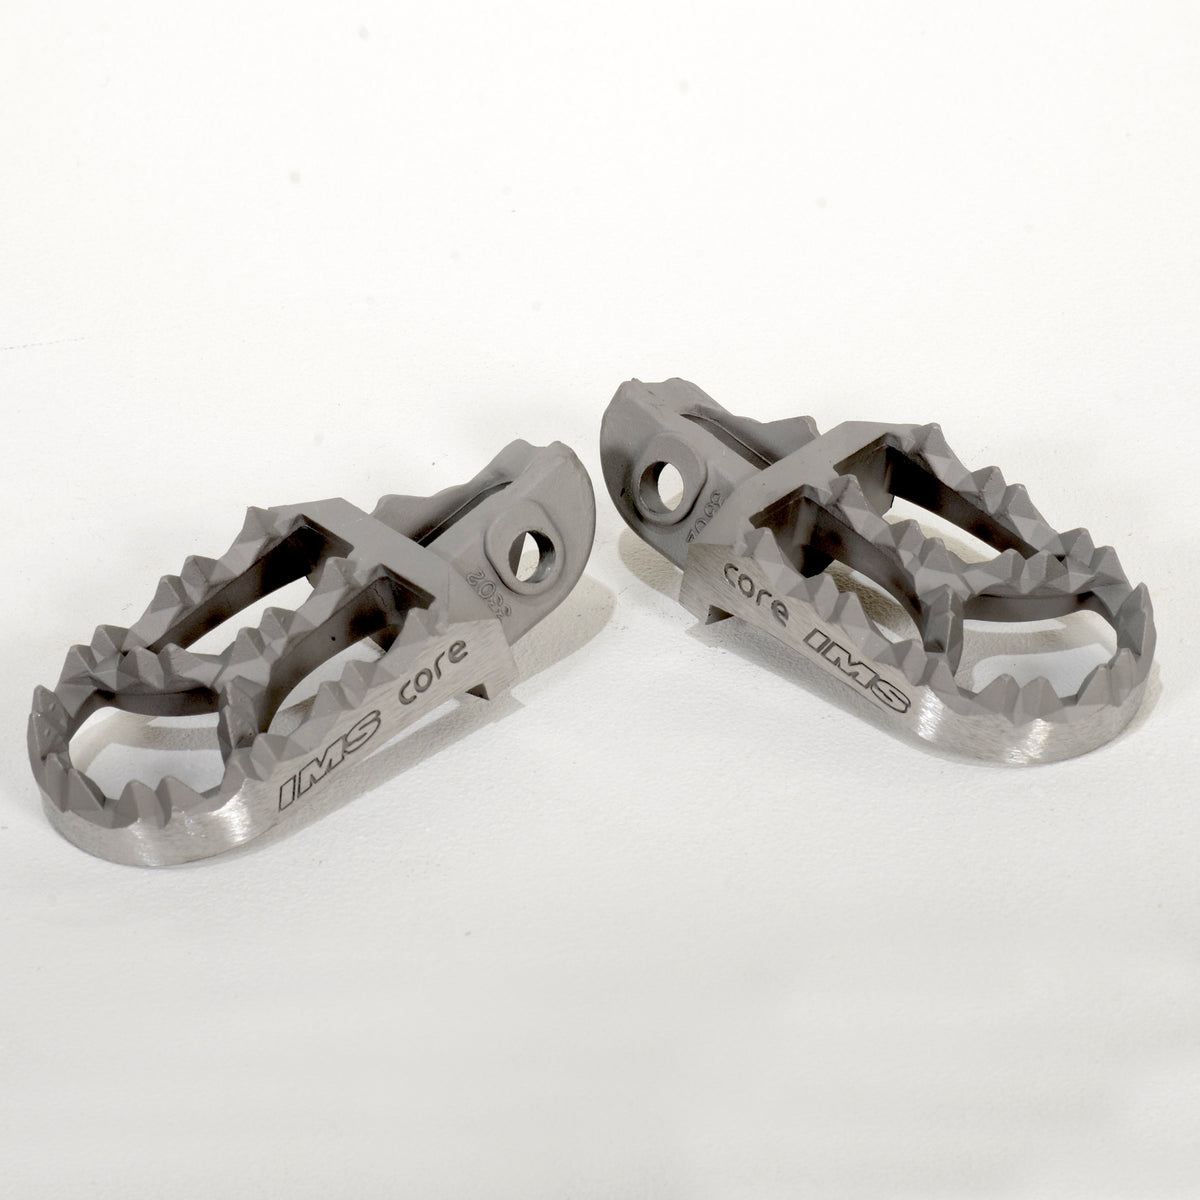 IMS Products Core MX Footpegs #43302